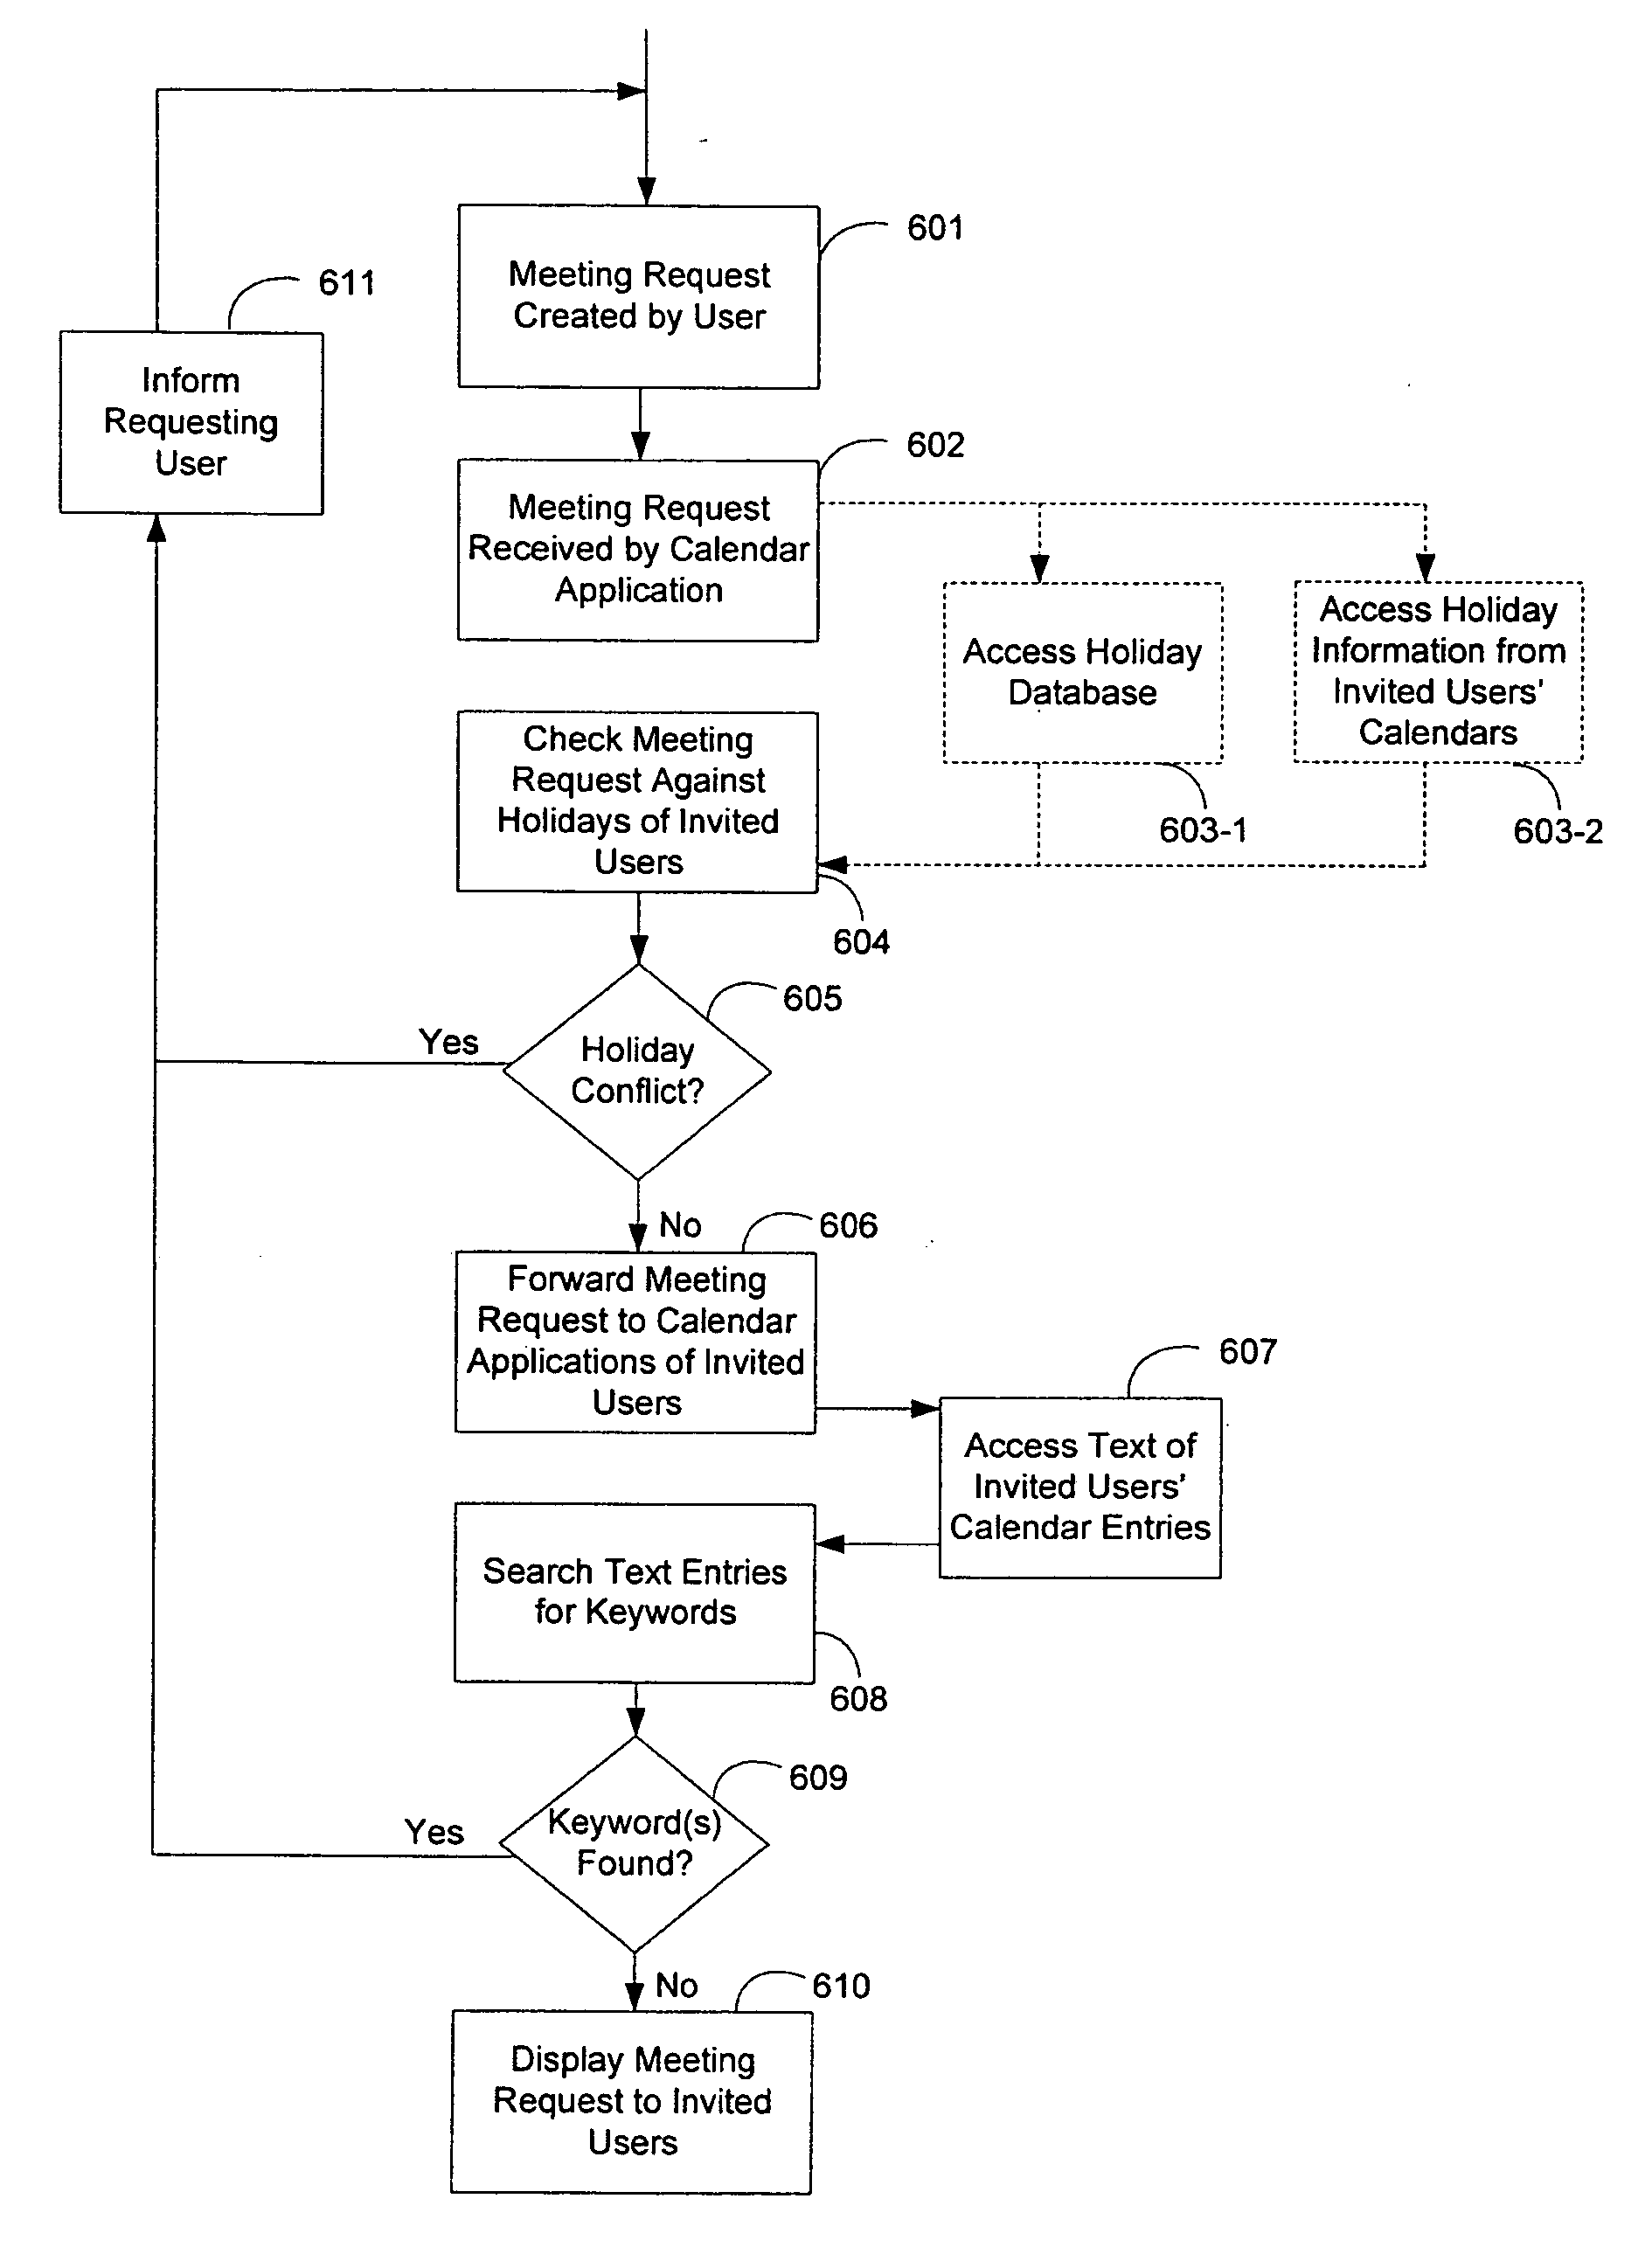 Network based processing of calendar meeting requests